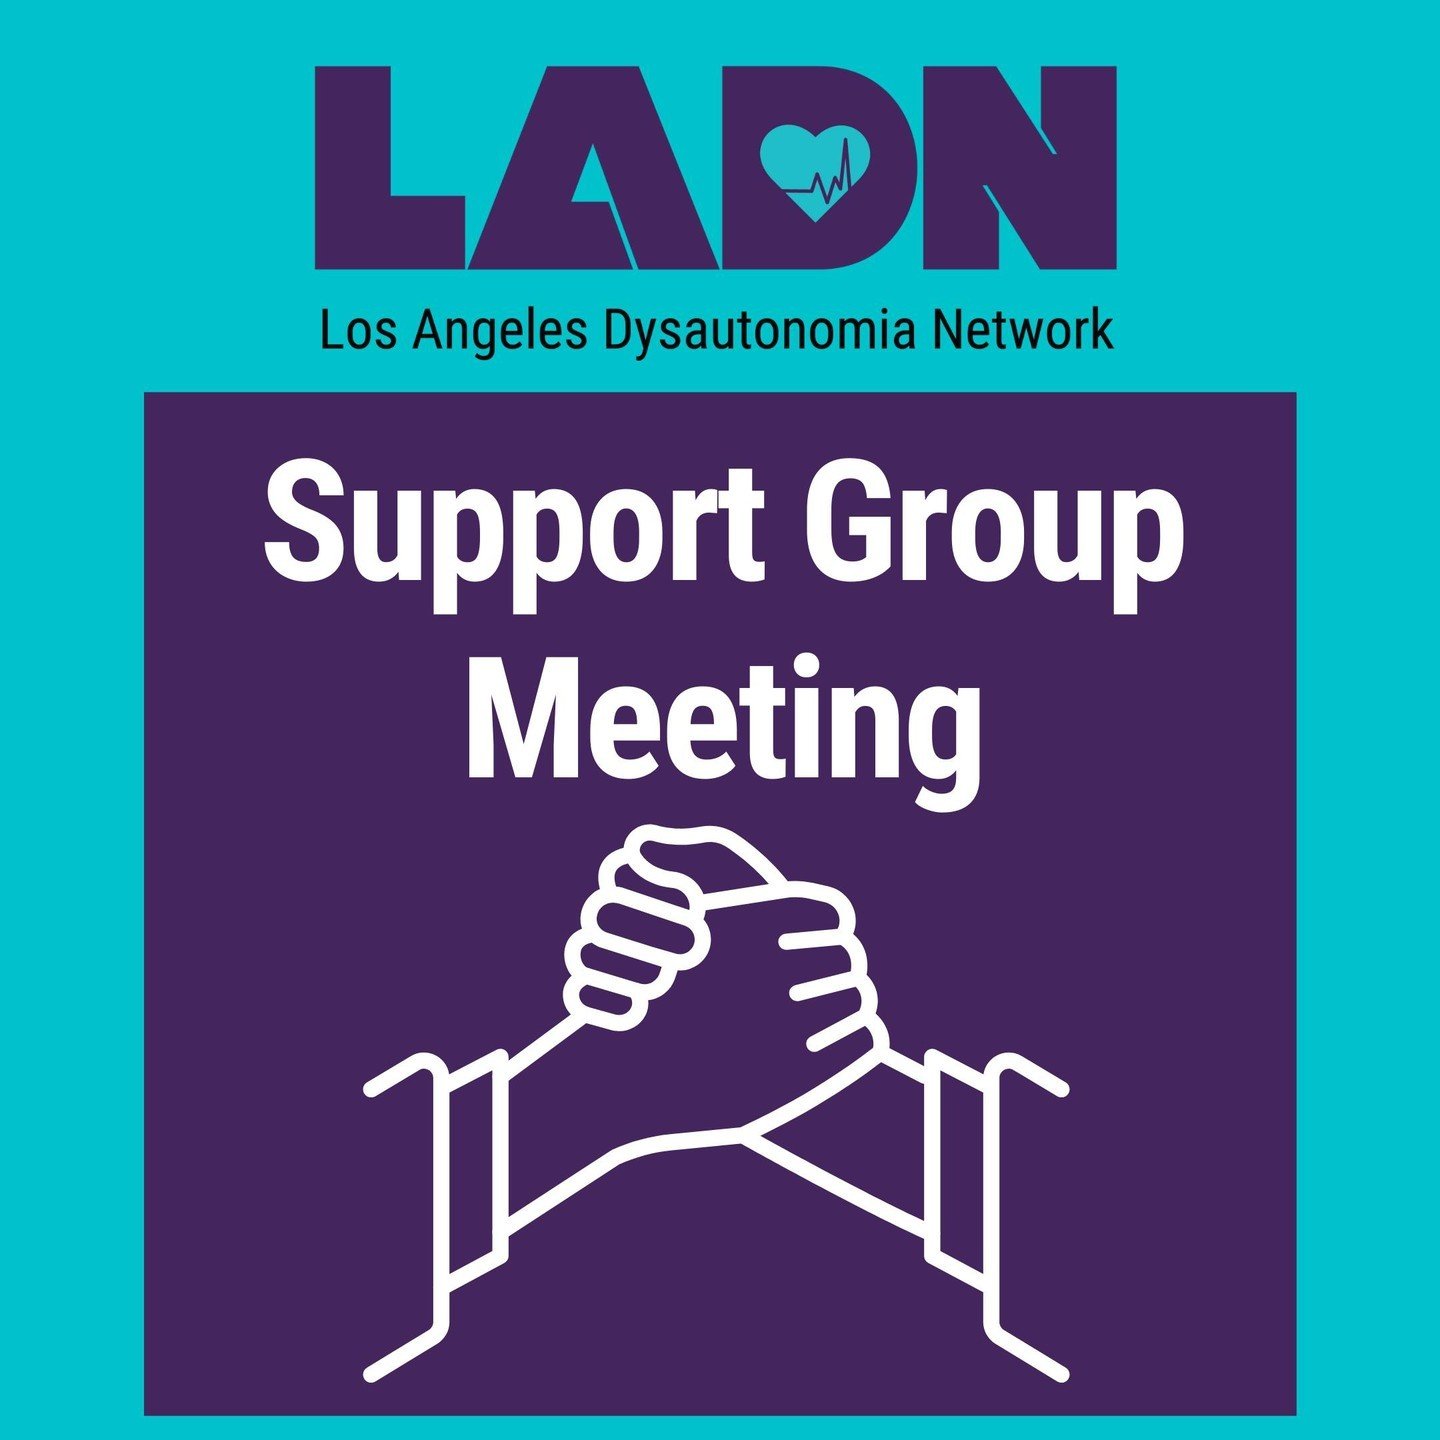 Join us for our next support group this Saturday, April 27th at 1pm on Zoom! The group is a great place to share experiences and resources for coping with symptoms. It's open to all dysautonomia patients and caregivers in LA and California. ⁠
⁠
If yo